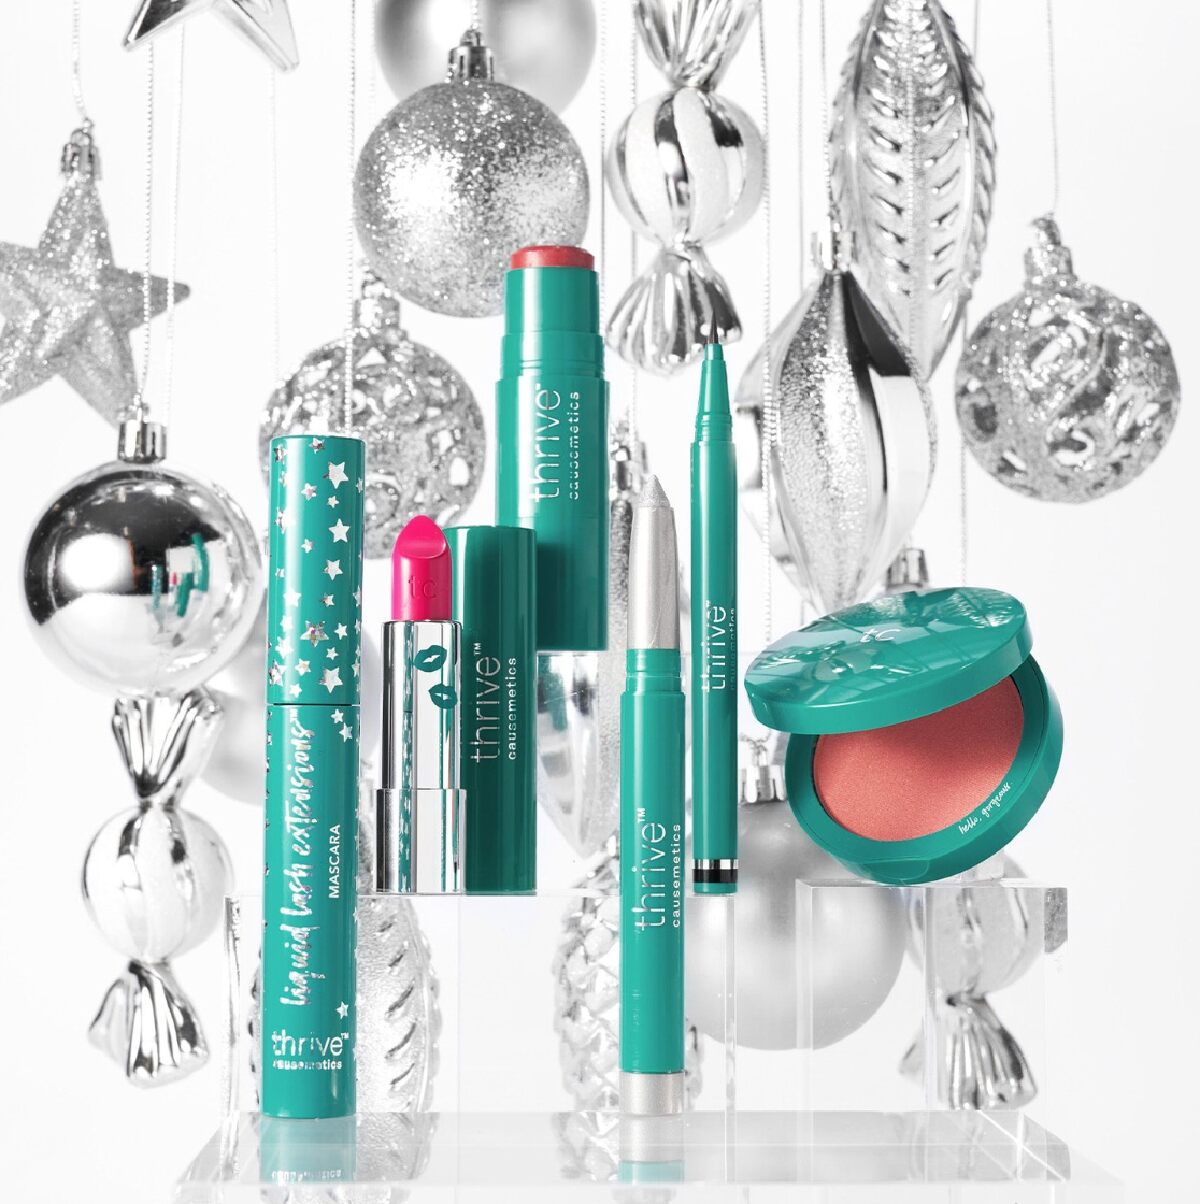 Green Thrive Causemetics Liquid Lash Extender Mascara next to other Thrive Causemetic beauty products against a white background with silver hanging ornaments. 